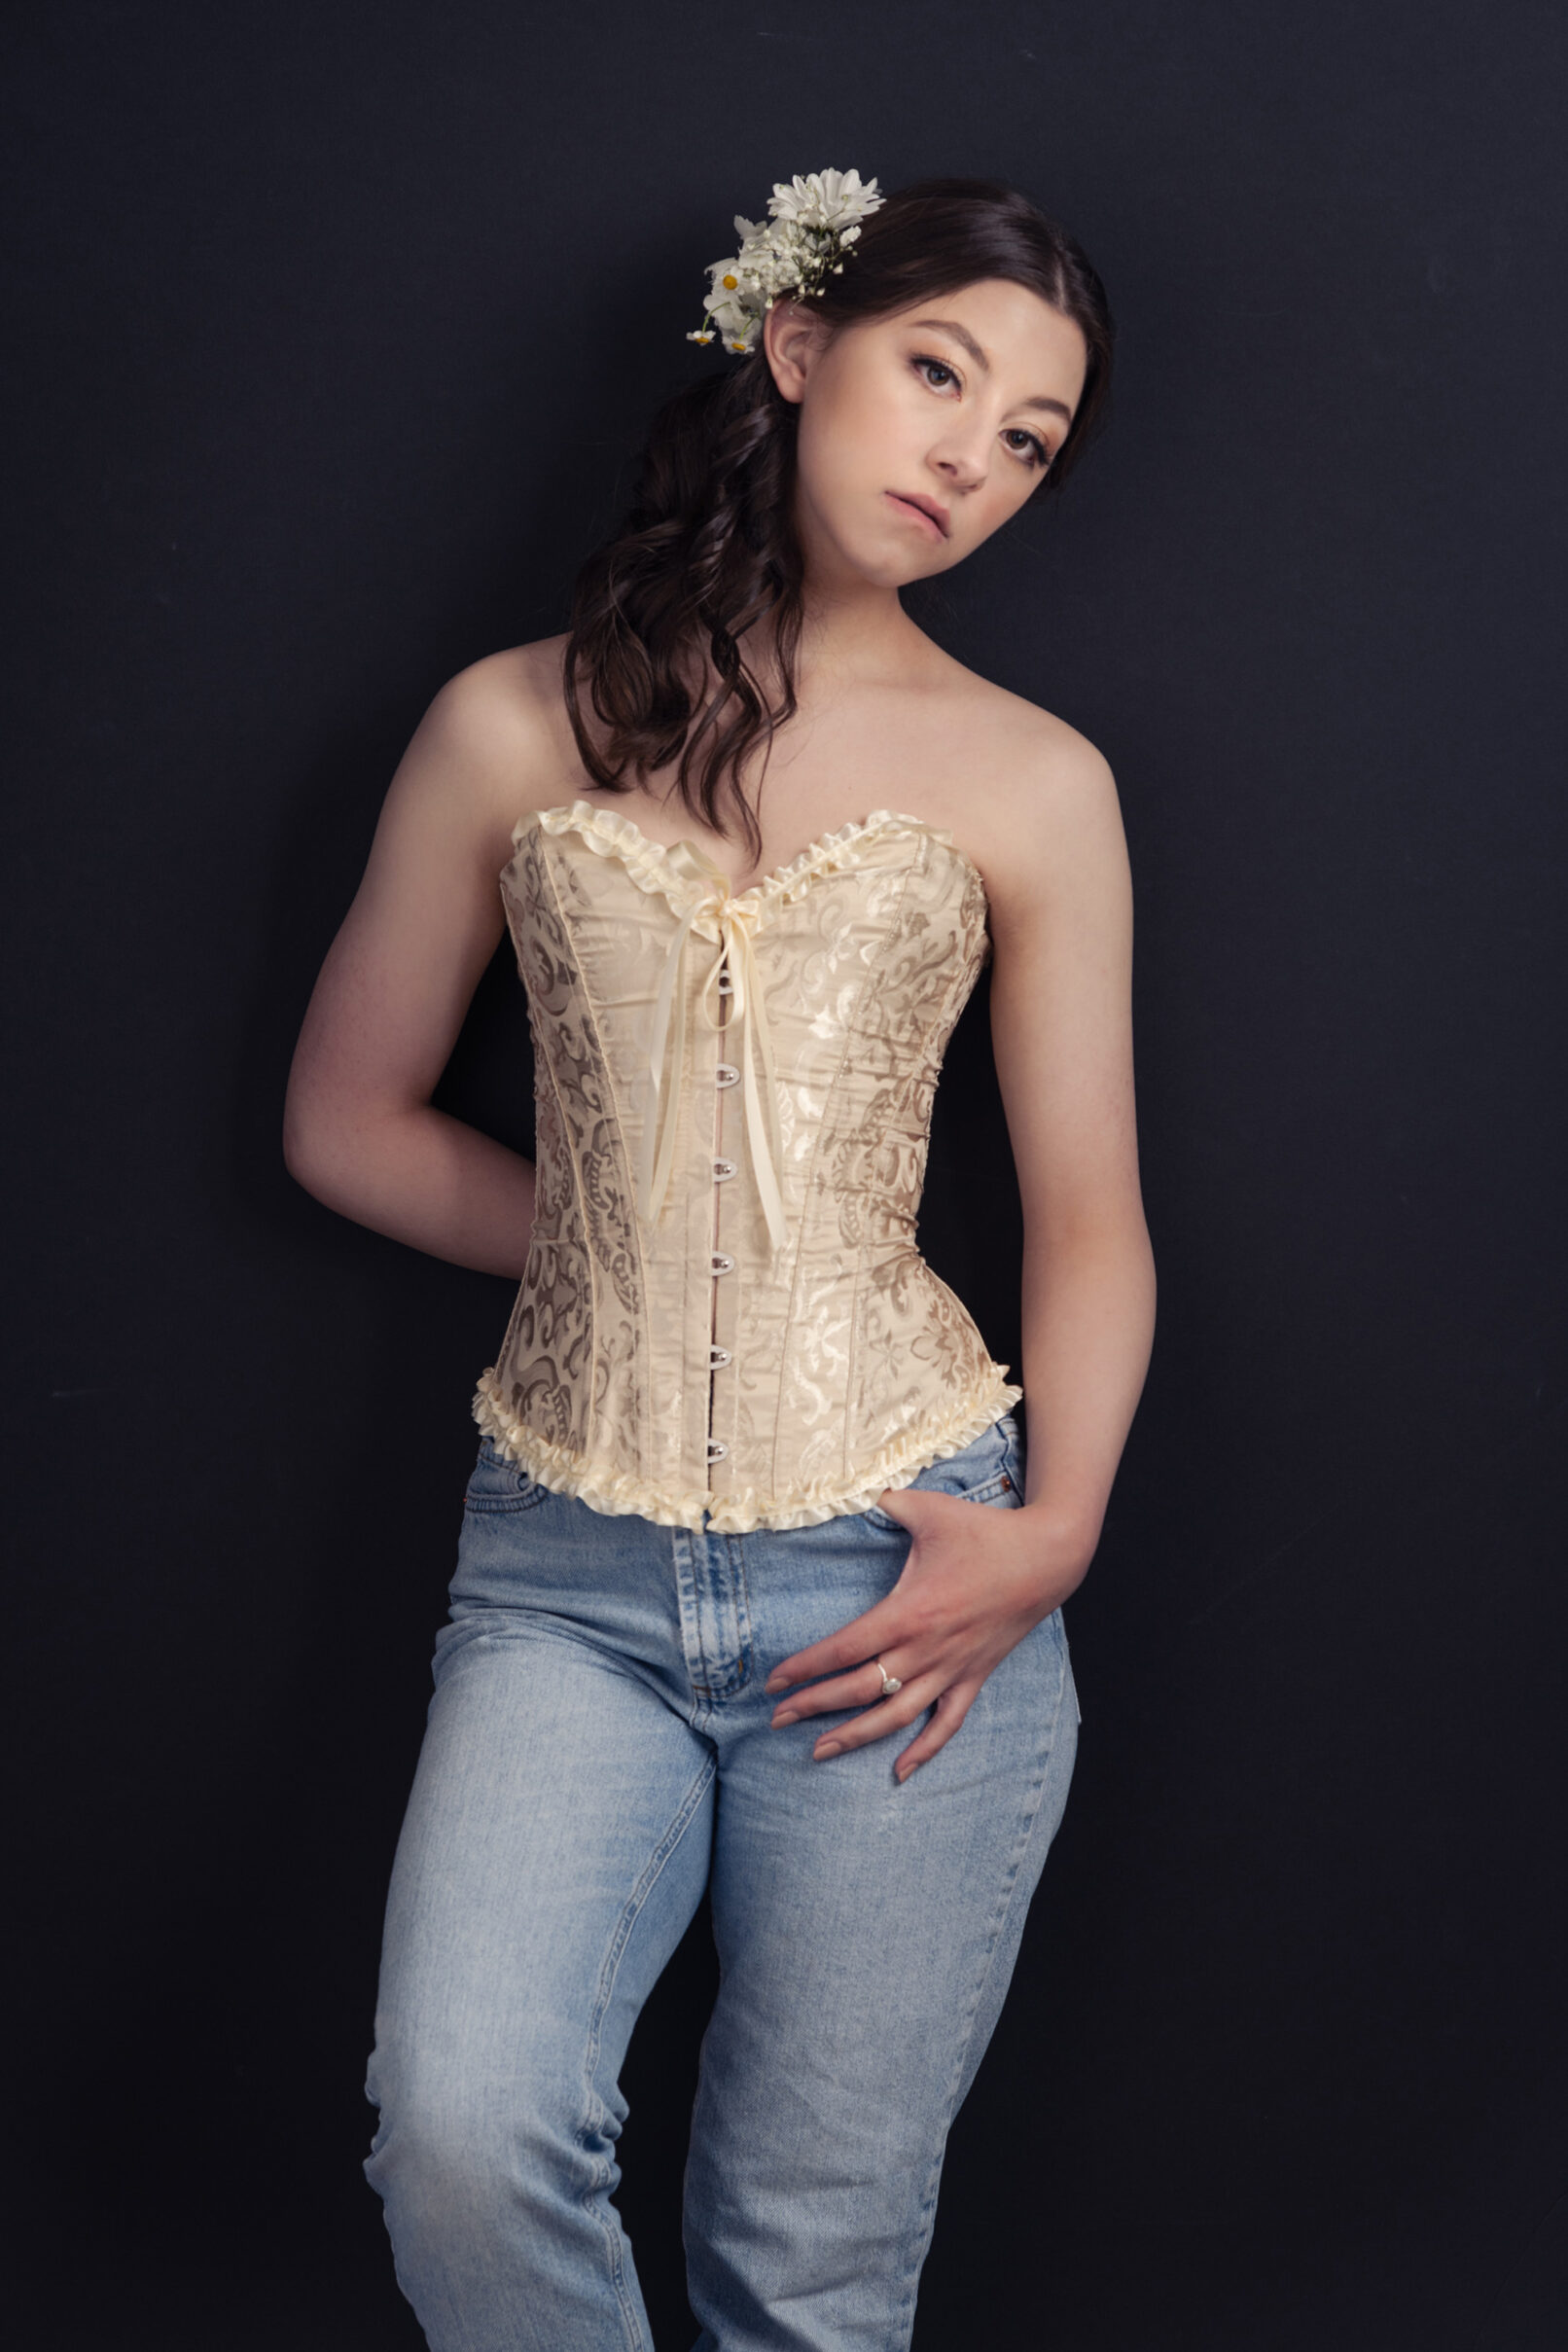 High School senior Girl wearing a corset and jeans leaning against dark wall.